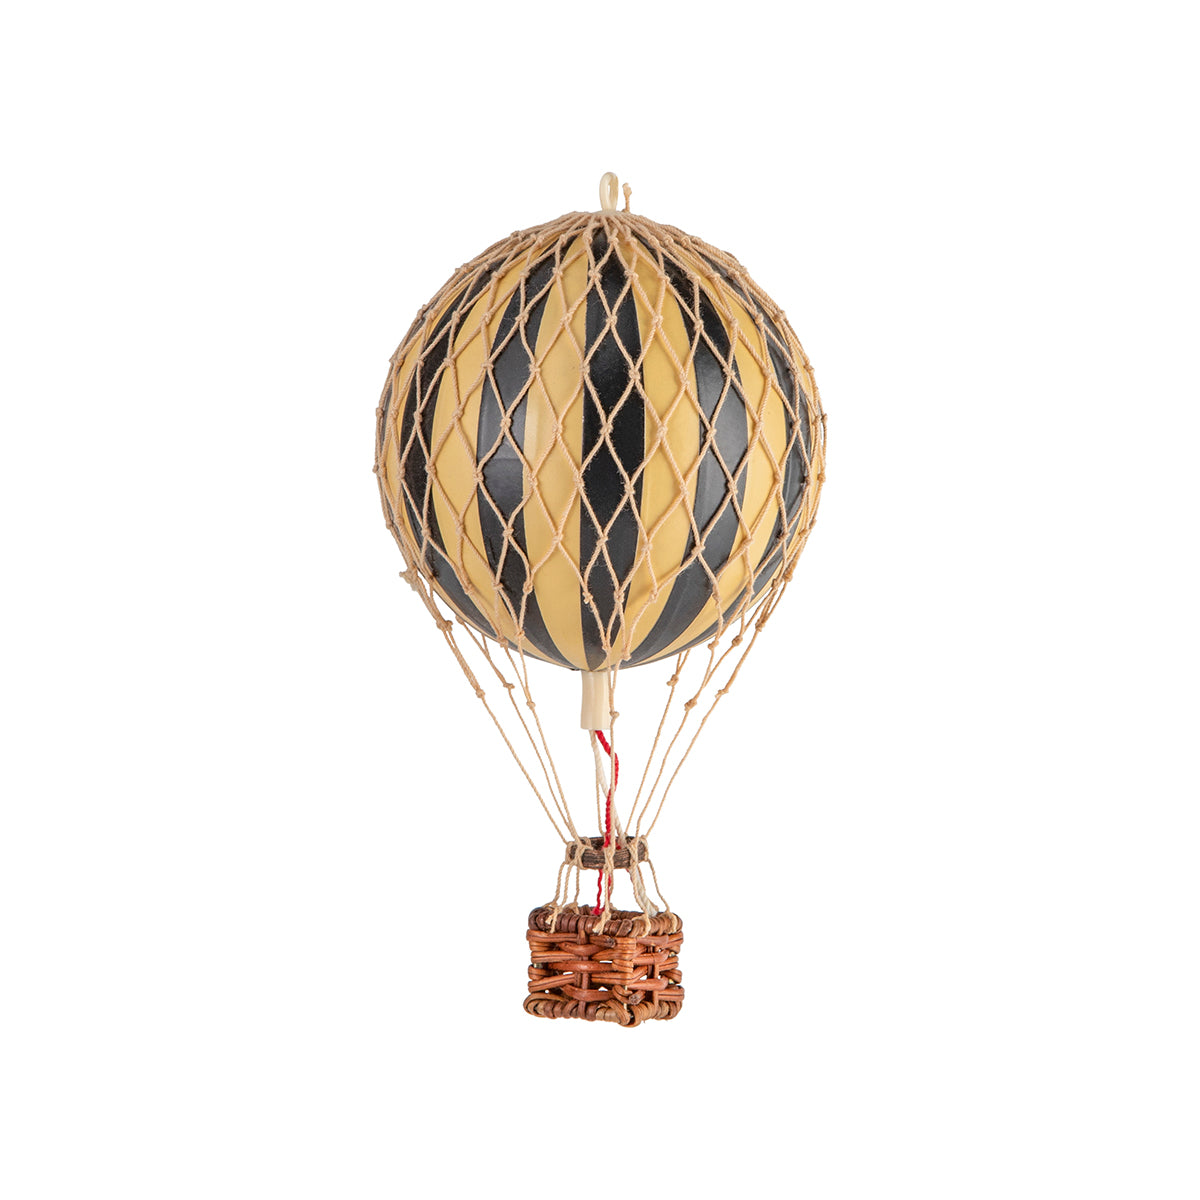 A Wonderen Extra Small Hot Air Balloon - Floating The Skies with a wicker basket takes you on an adventurous journey.